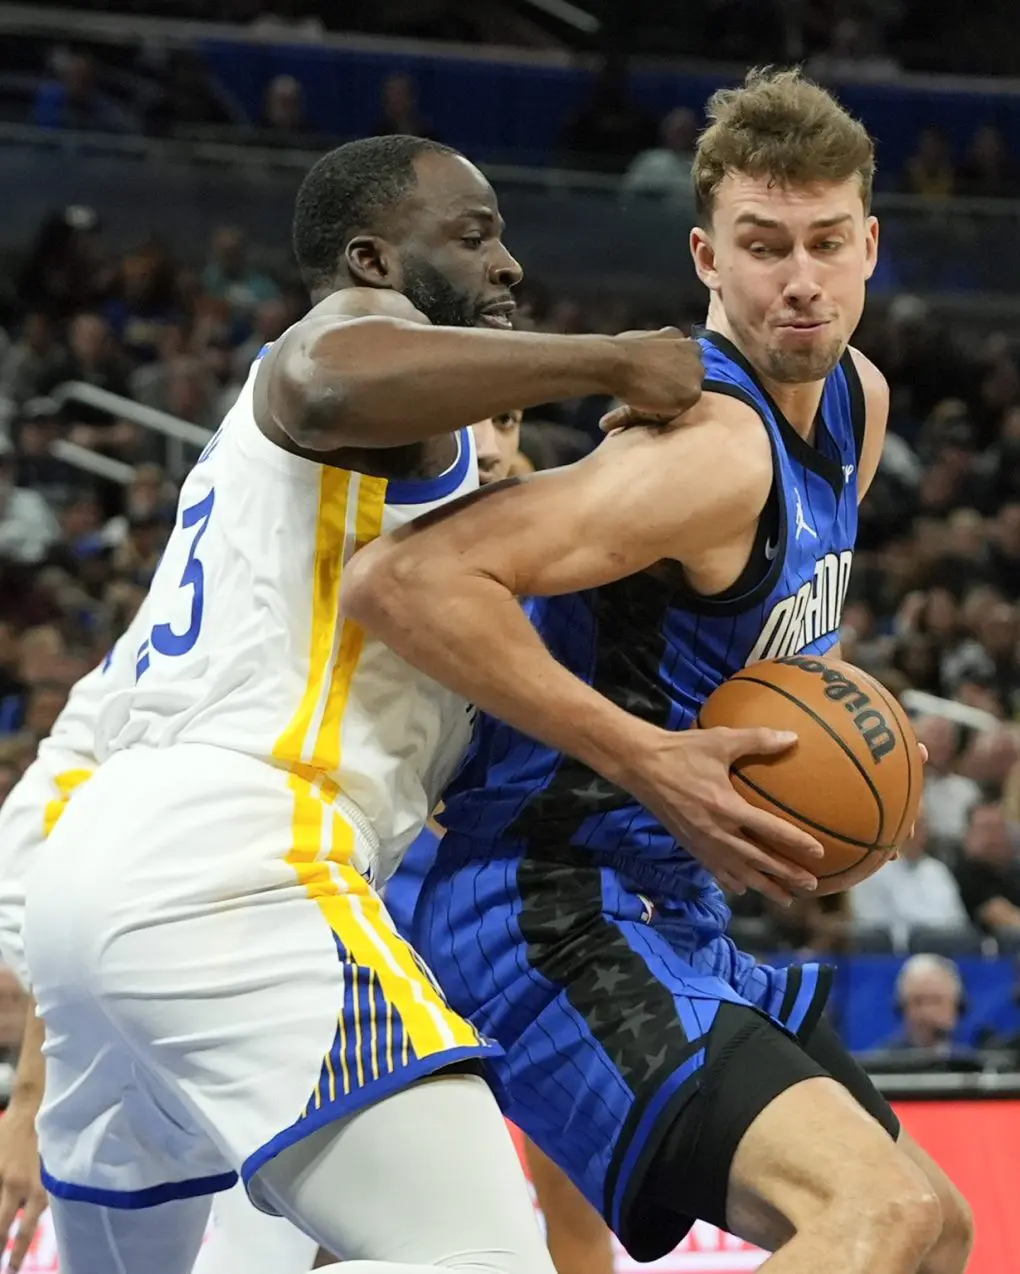 LA Post: Warriors' Draymond Green is ejected less than 4 minutes into game against Magic